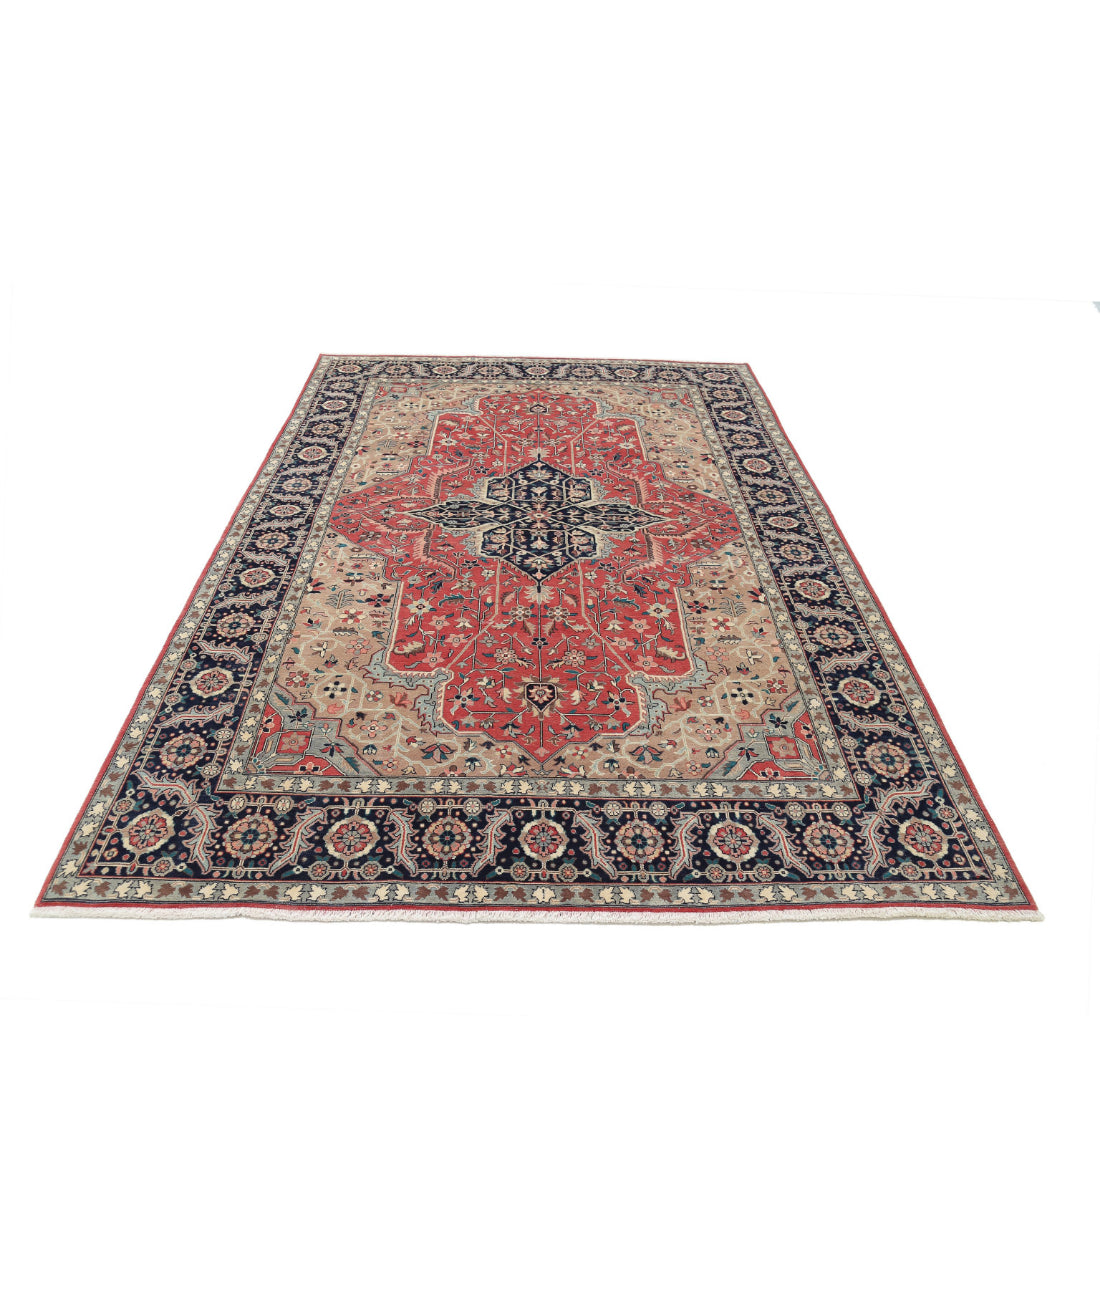 Hand Knotted Heritage Persian Style Heriz Wool Rug - 6'0'' x 8'11'' 6'0'' x 8'11'' (180 X 268) / Pink / Blue